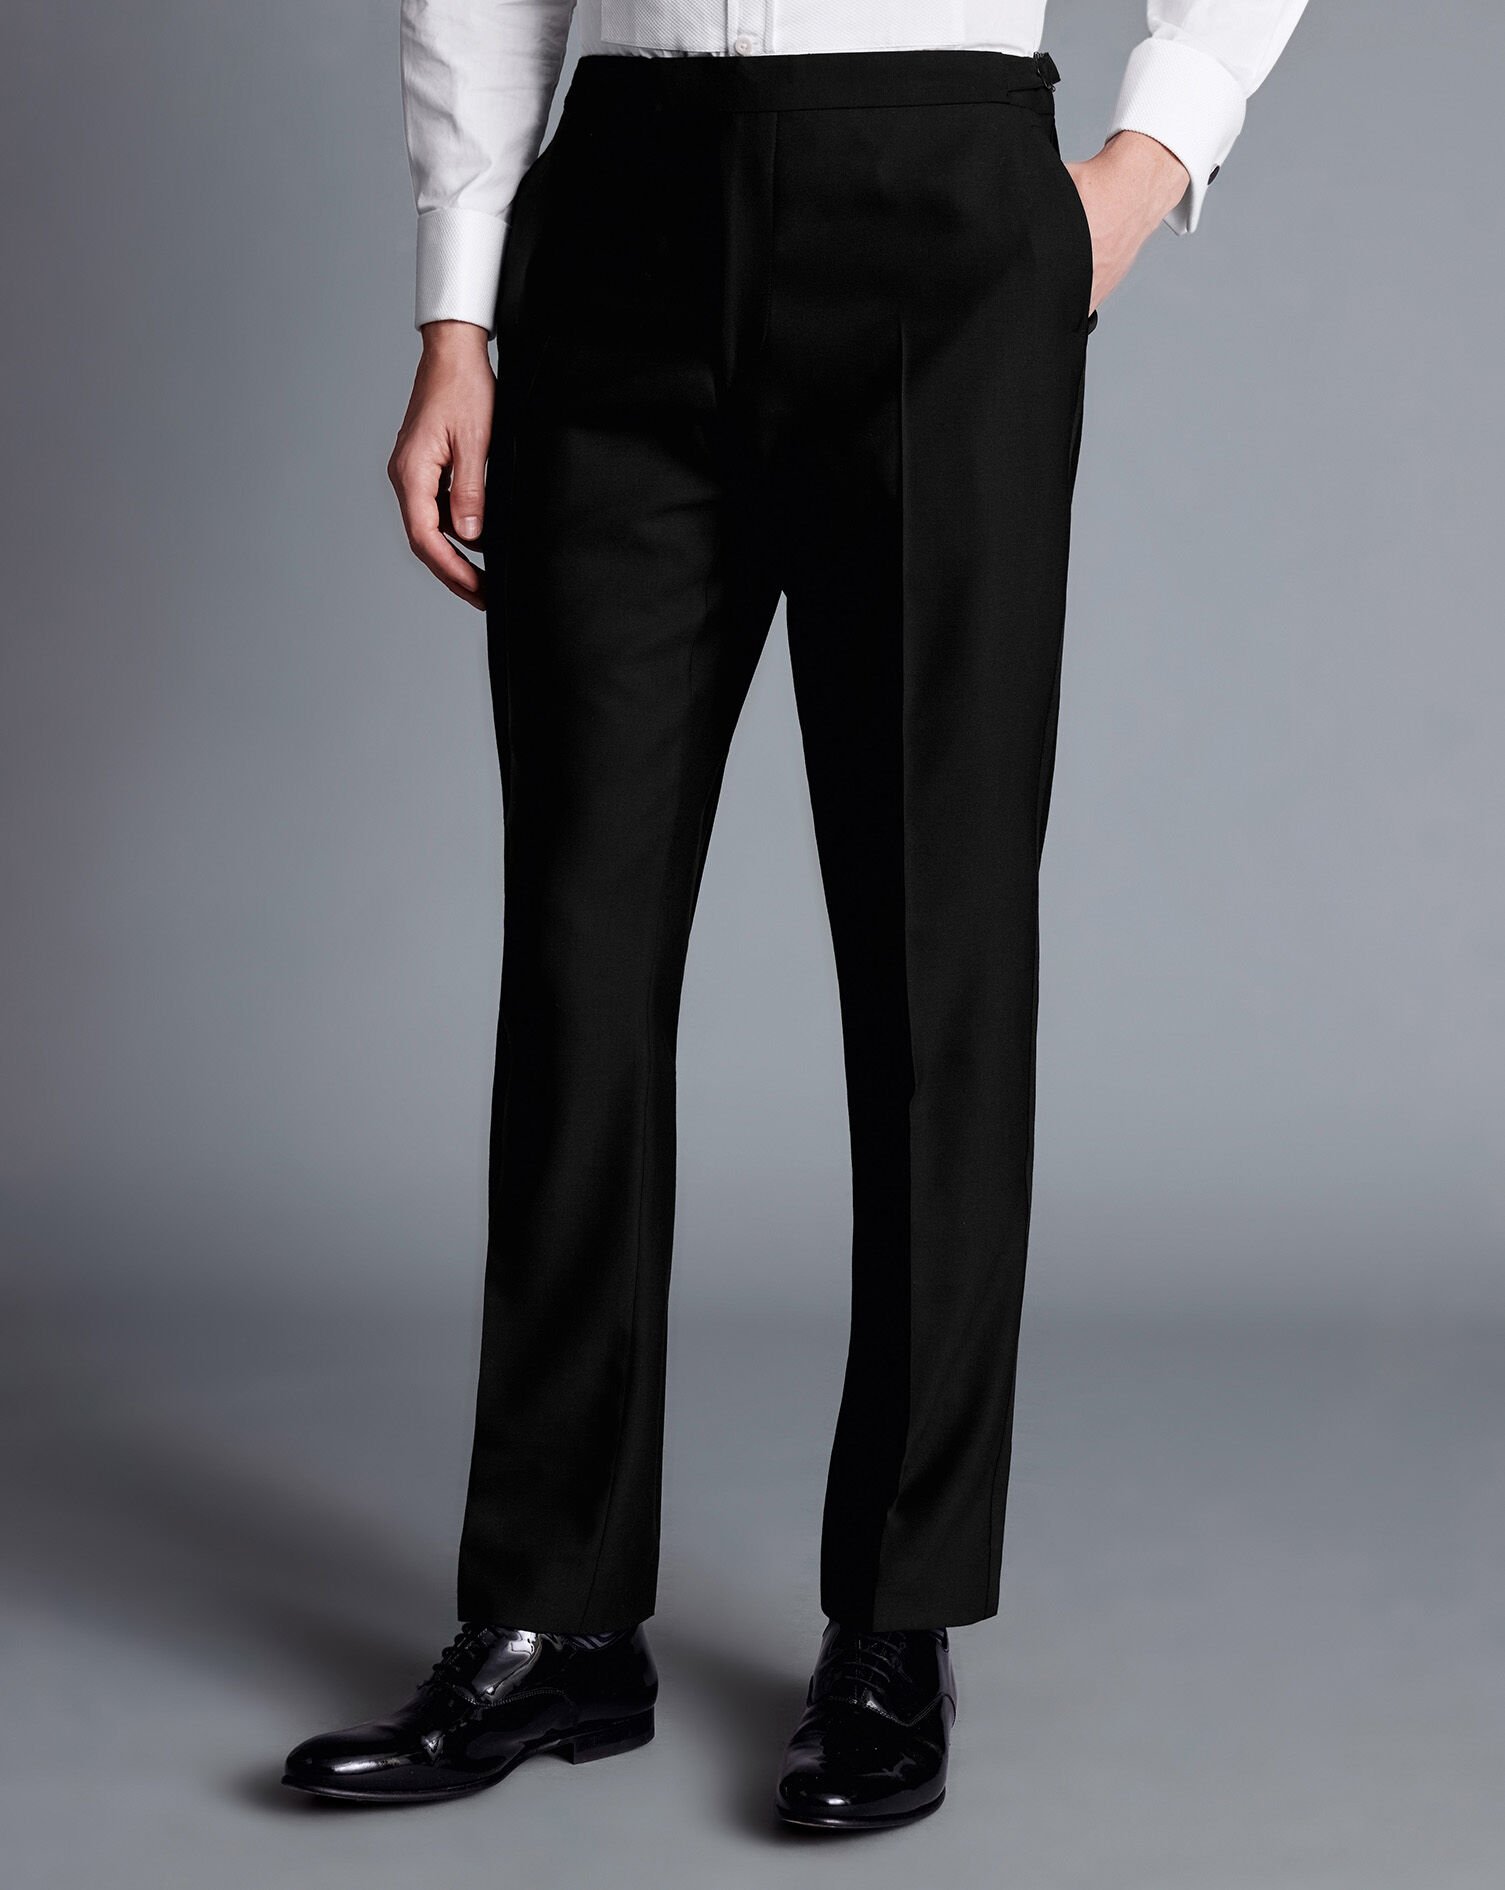 STRONG003 TROUSERS (BLACK) SIZE48